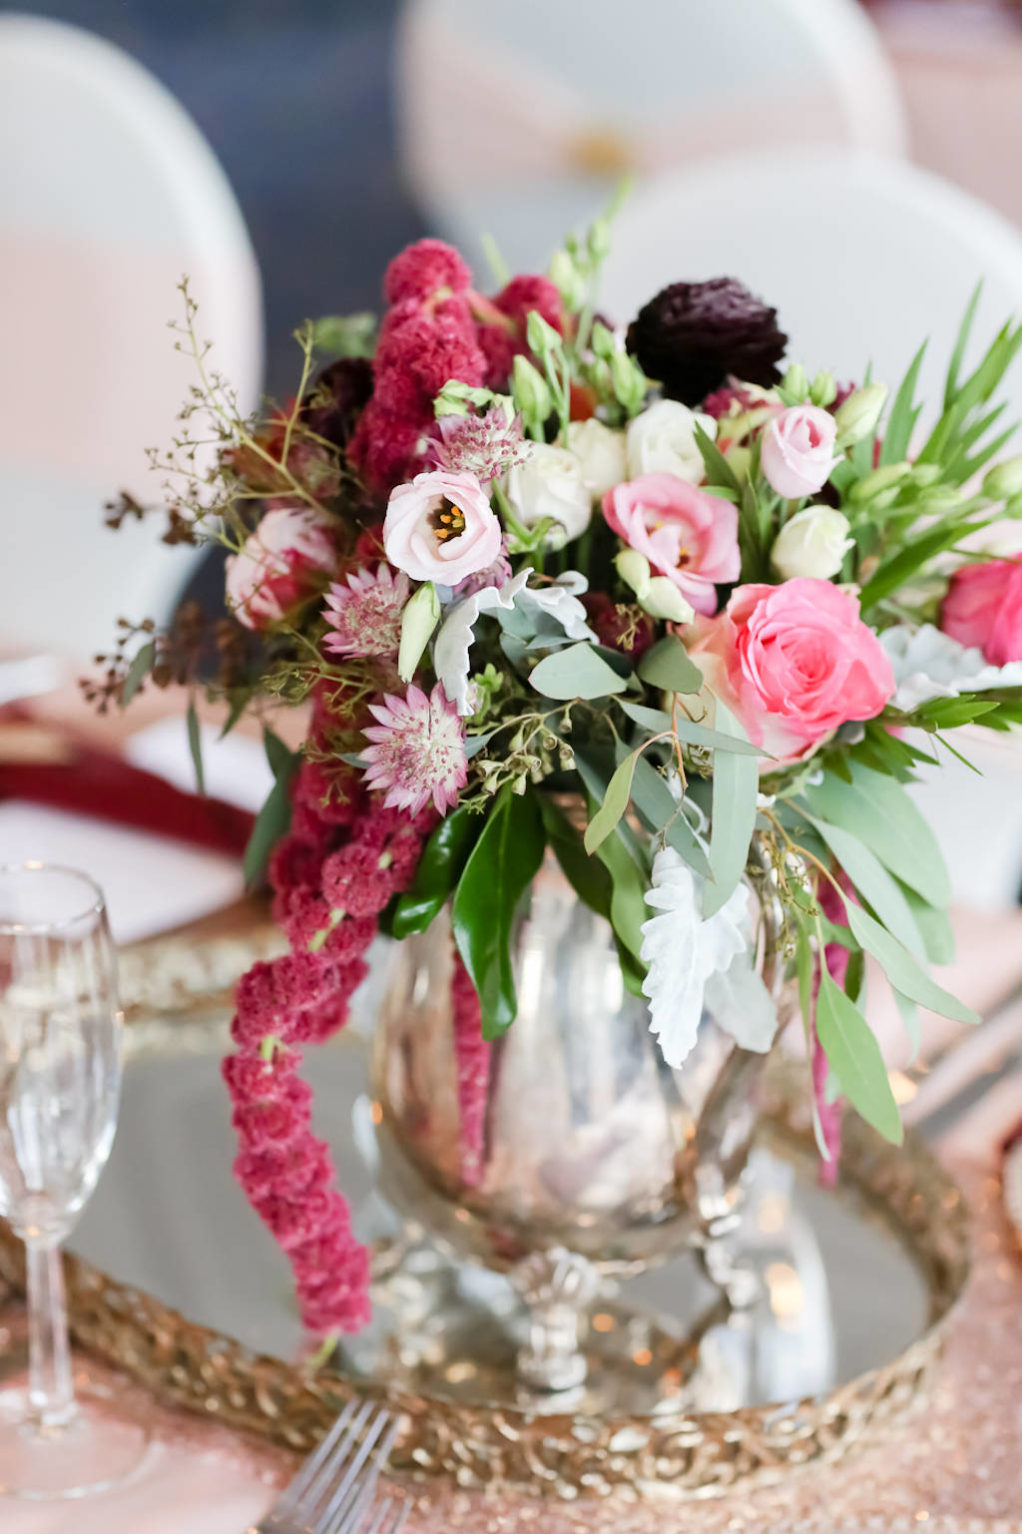 French Country Inspired Wedding Reception Decor, Low Silver Vase on Antique Mirror Tray with Pink, Dark Purple, Baby Pink, Greenery and Pink Hanging Amaranthus Floral Centerpiece | Tampa Bay Wedding Photographer Lifelong Photography Studio | Wedding Rentals Kate Ryan Event Rentals